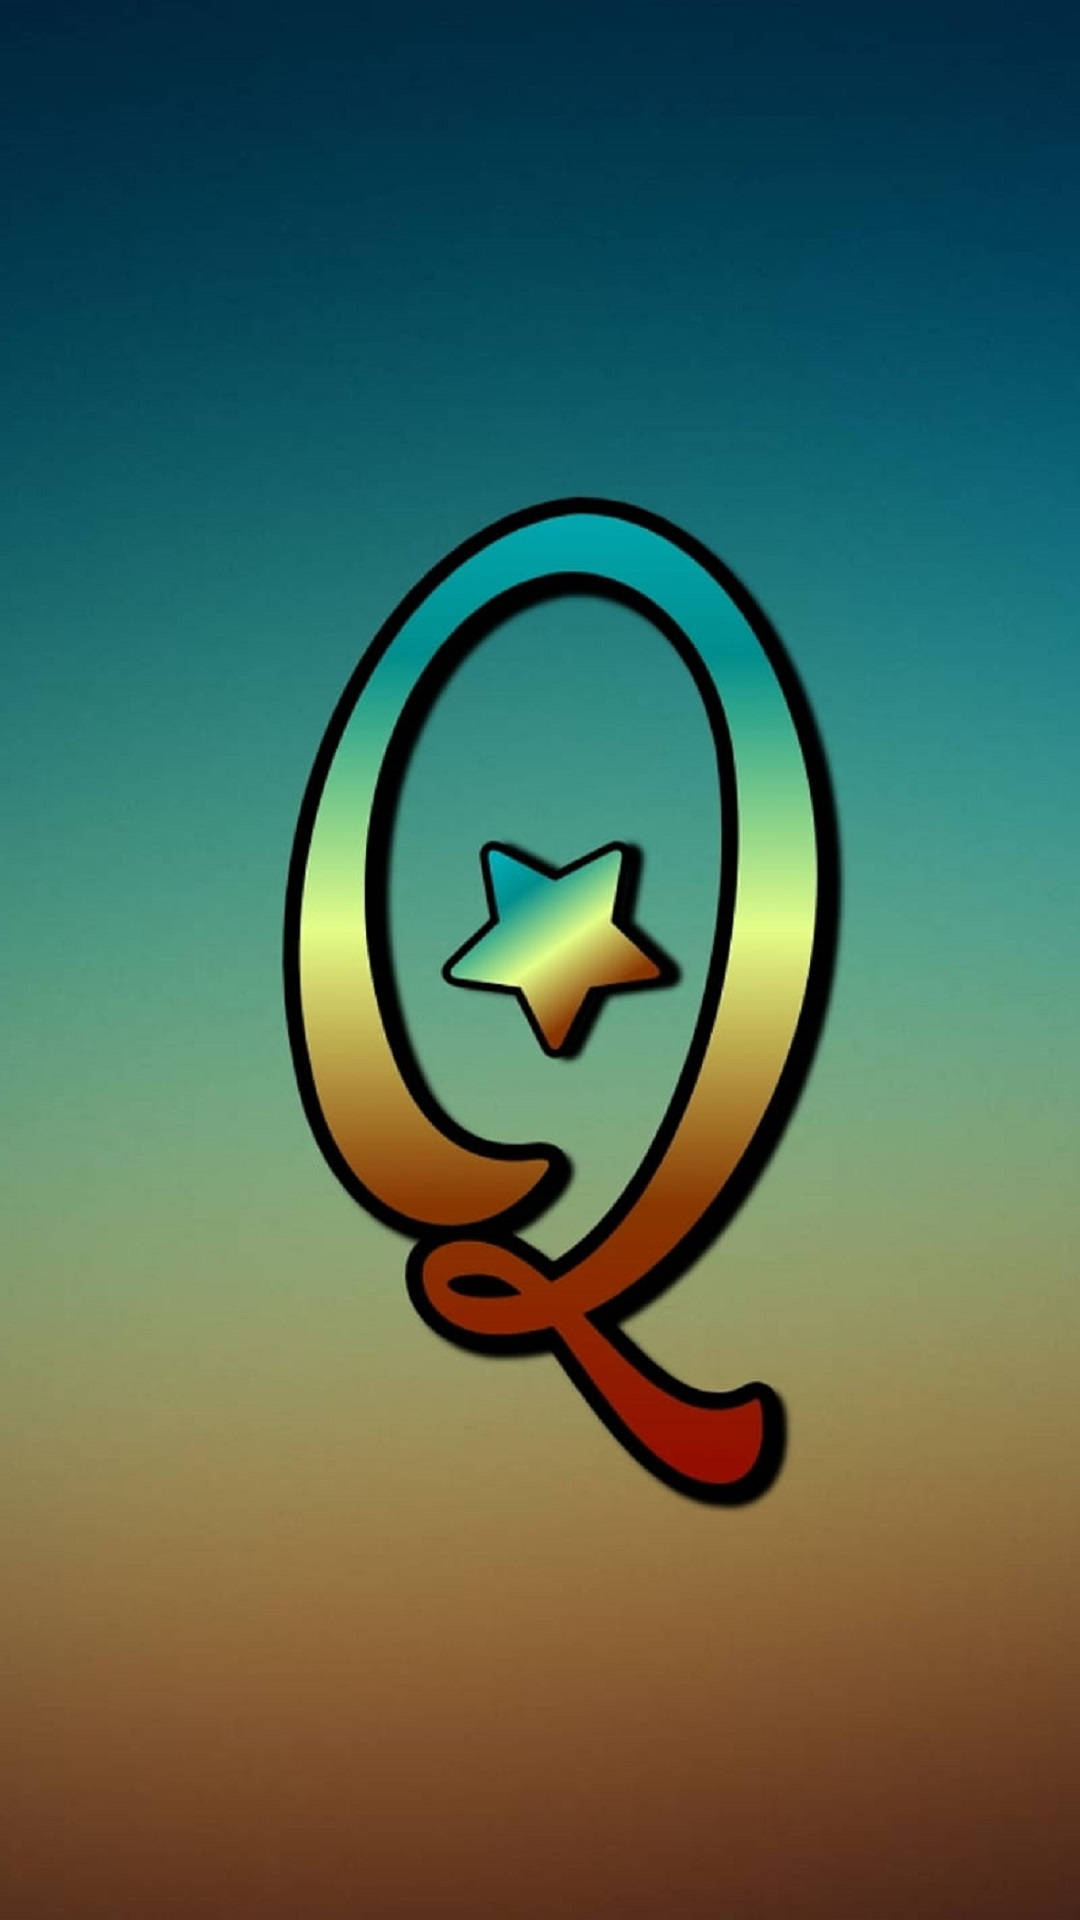 Letter Q With A Star Icon